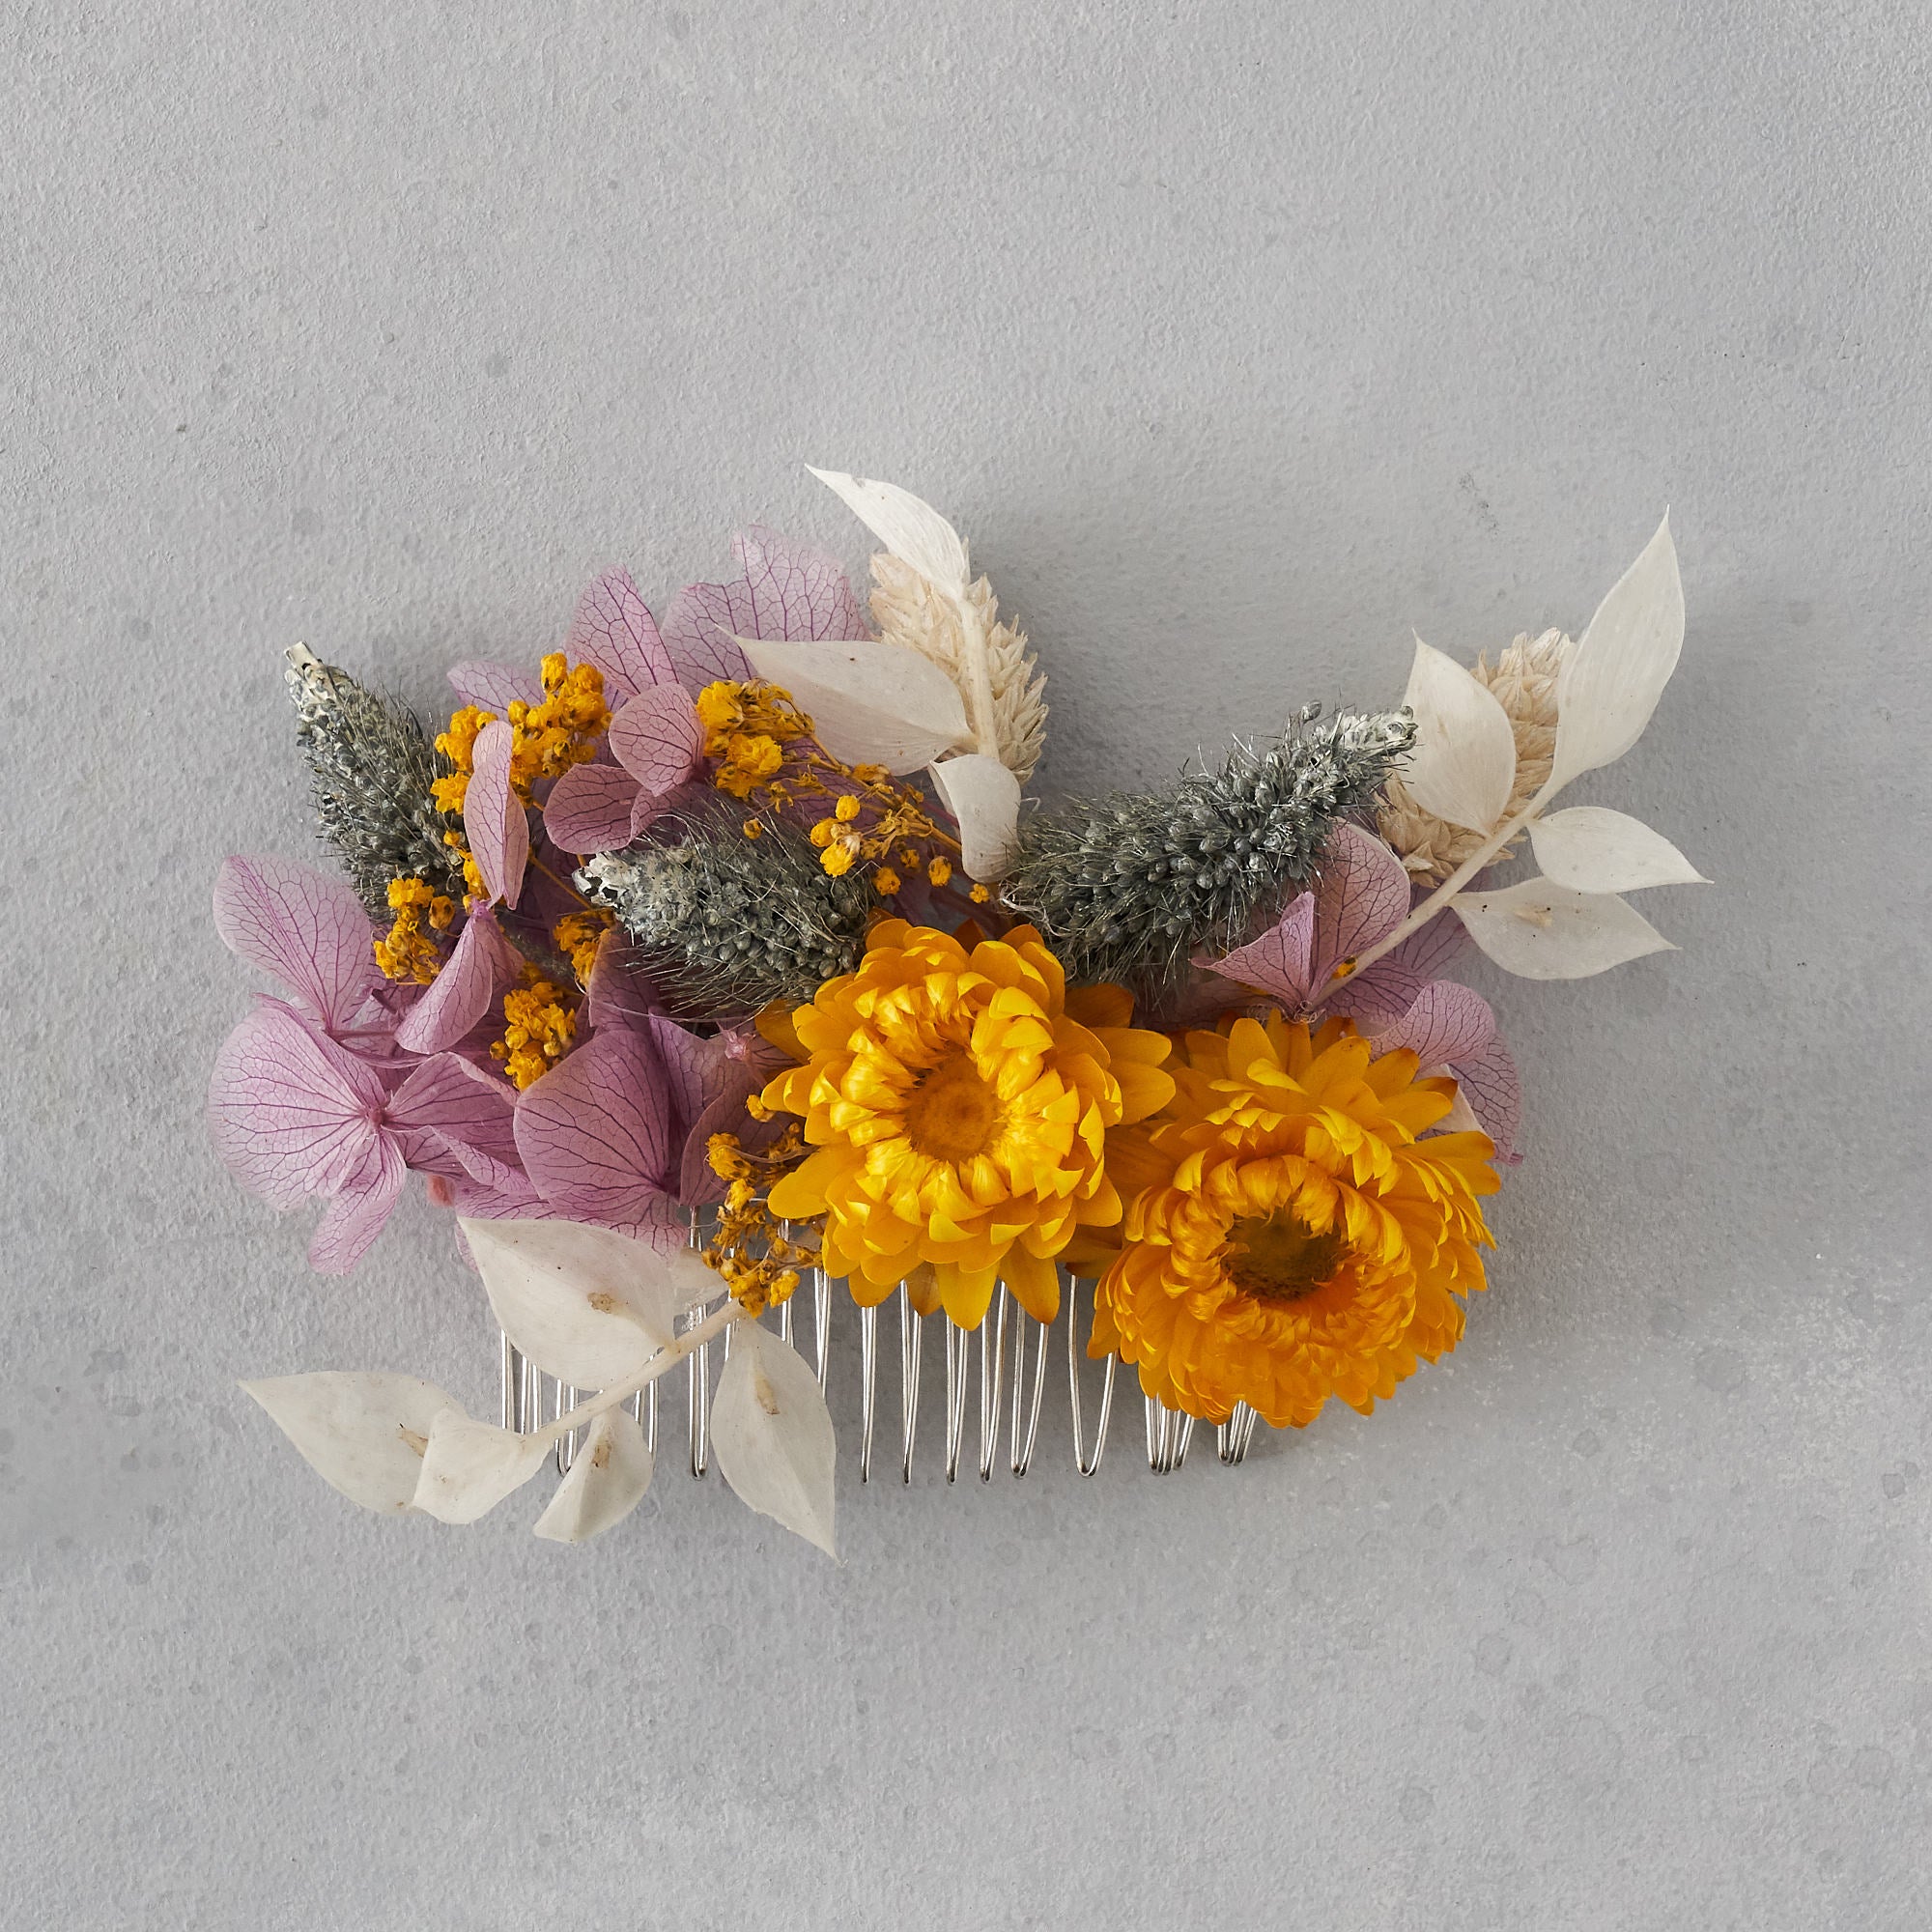 Dried flower hair comb : dusty lilac and sunshine yellow